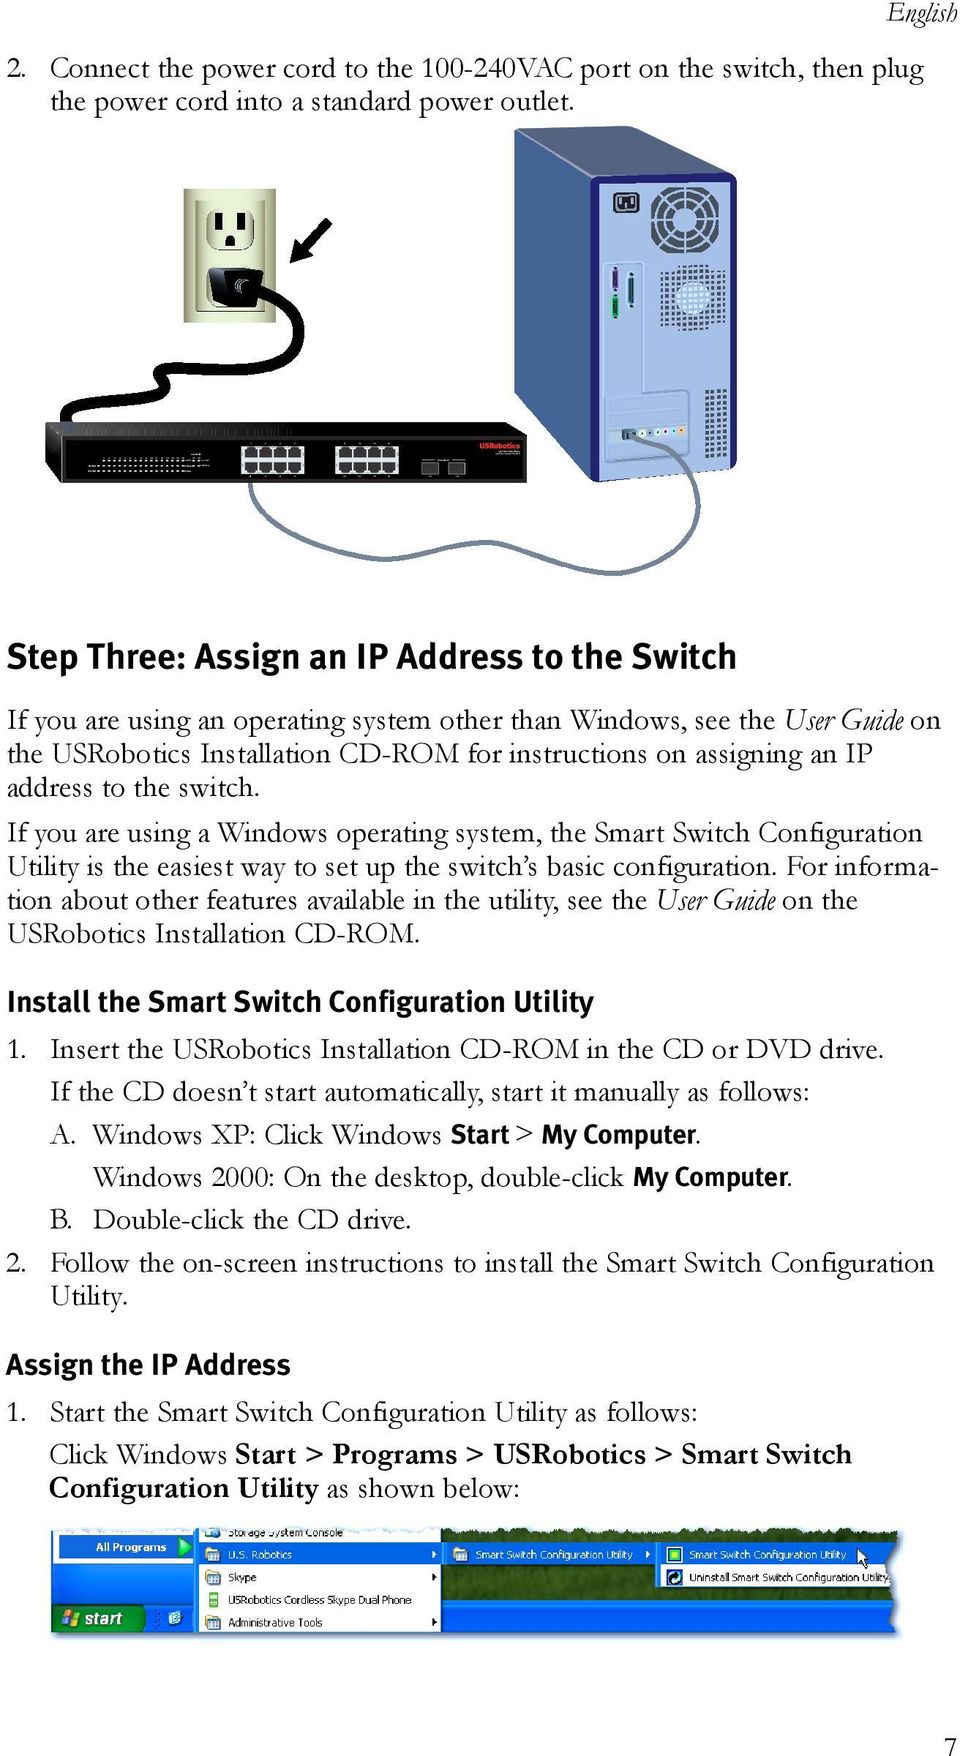 English Step Three: Assign an IP Address to the Switch If you are using an operating system other than Windows, see the User Guide on the USRobotics Installation CD-ROM for instructions on assigning